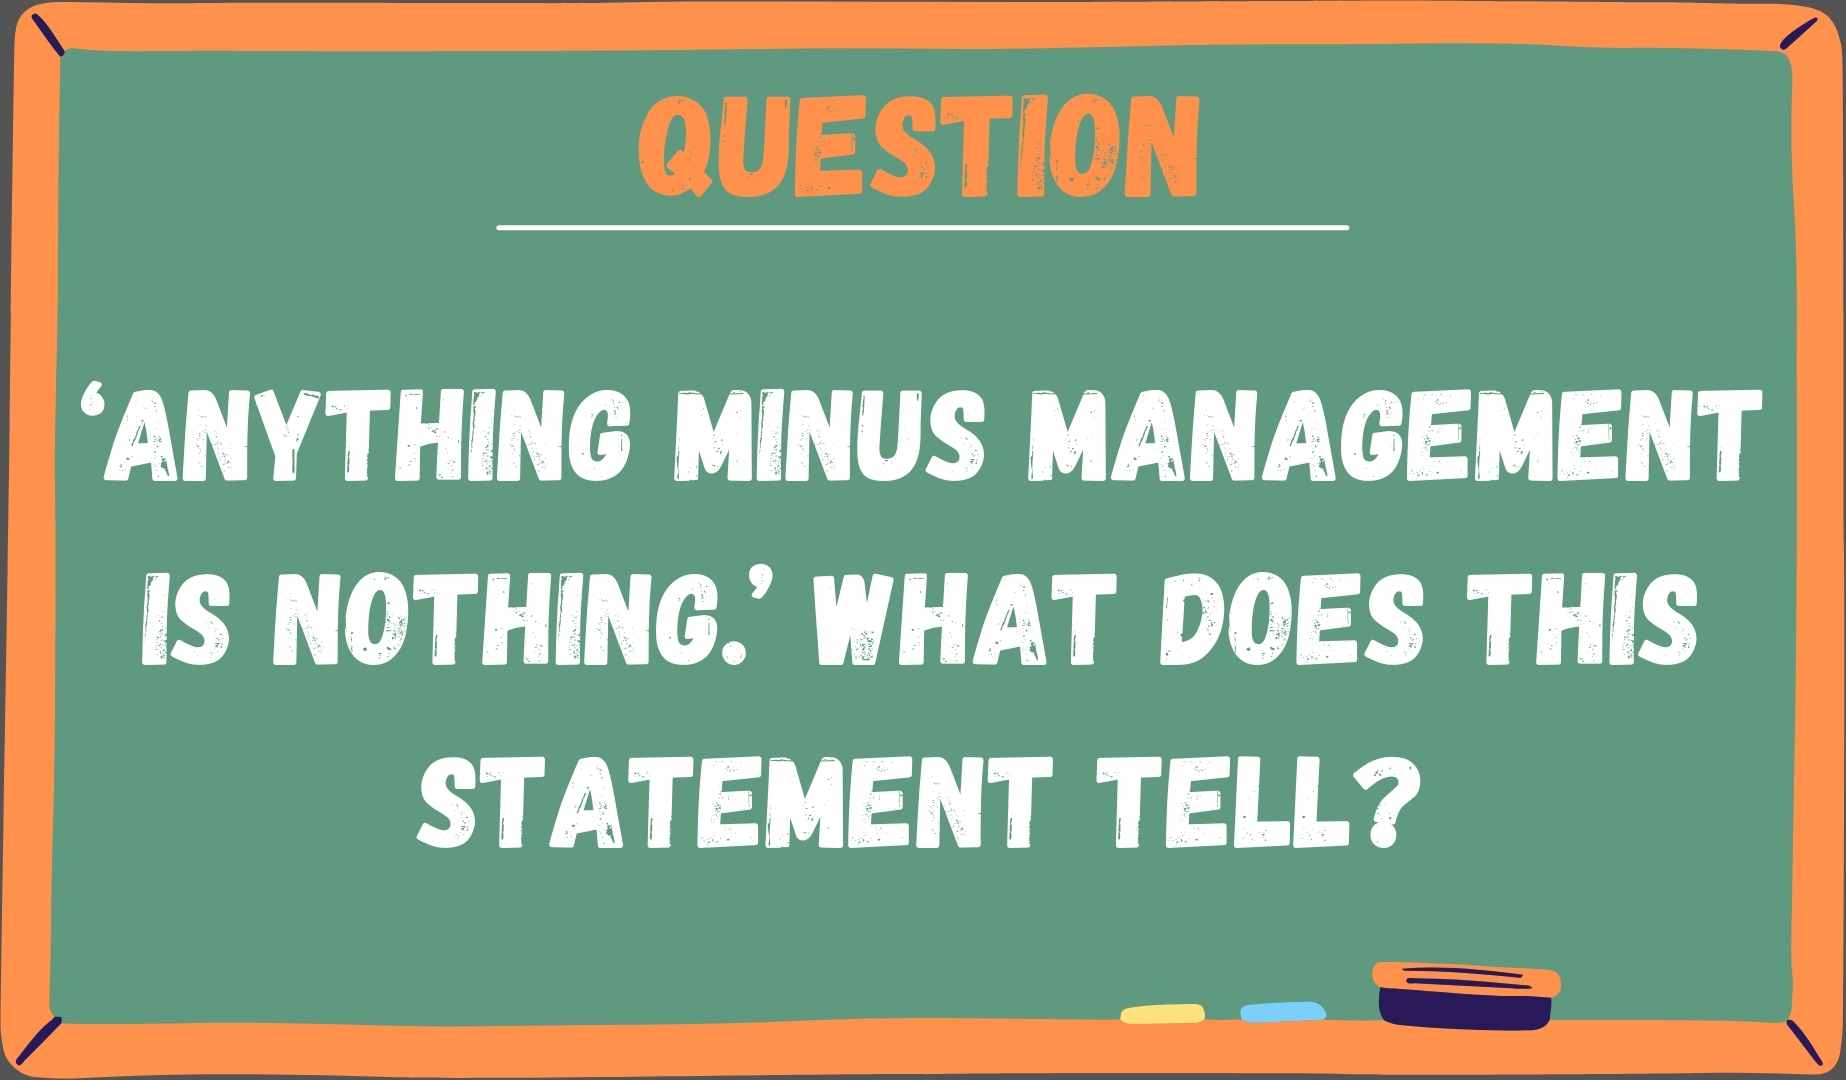 ‘Anything minus management is nothing.’ What does this statement tell?